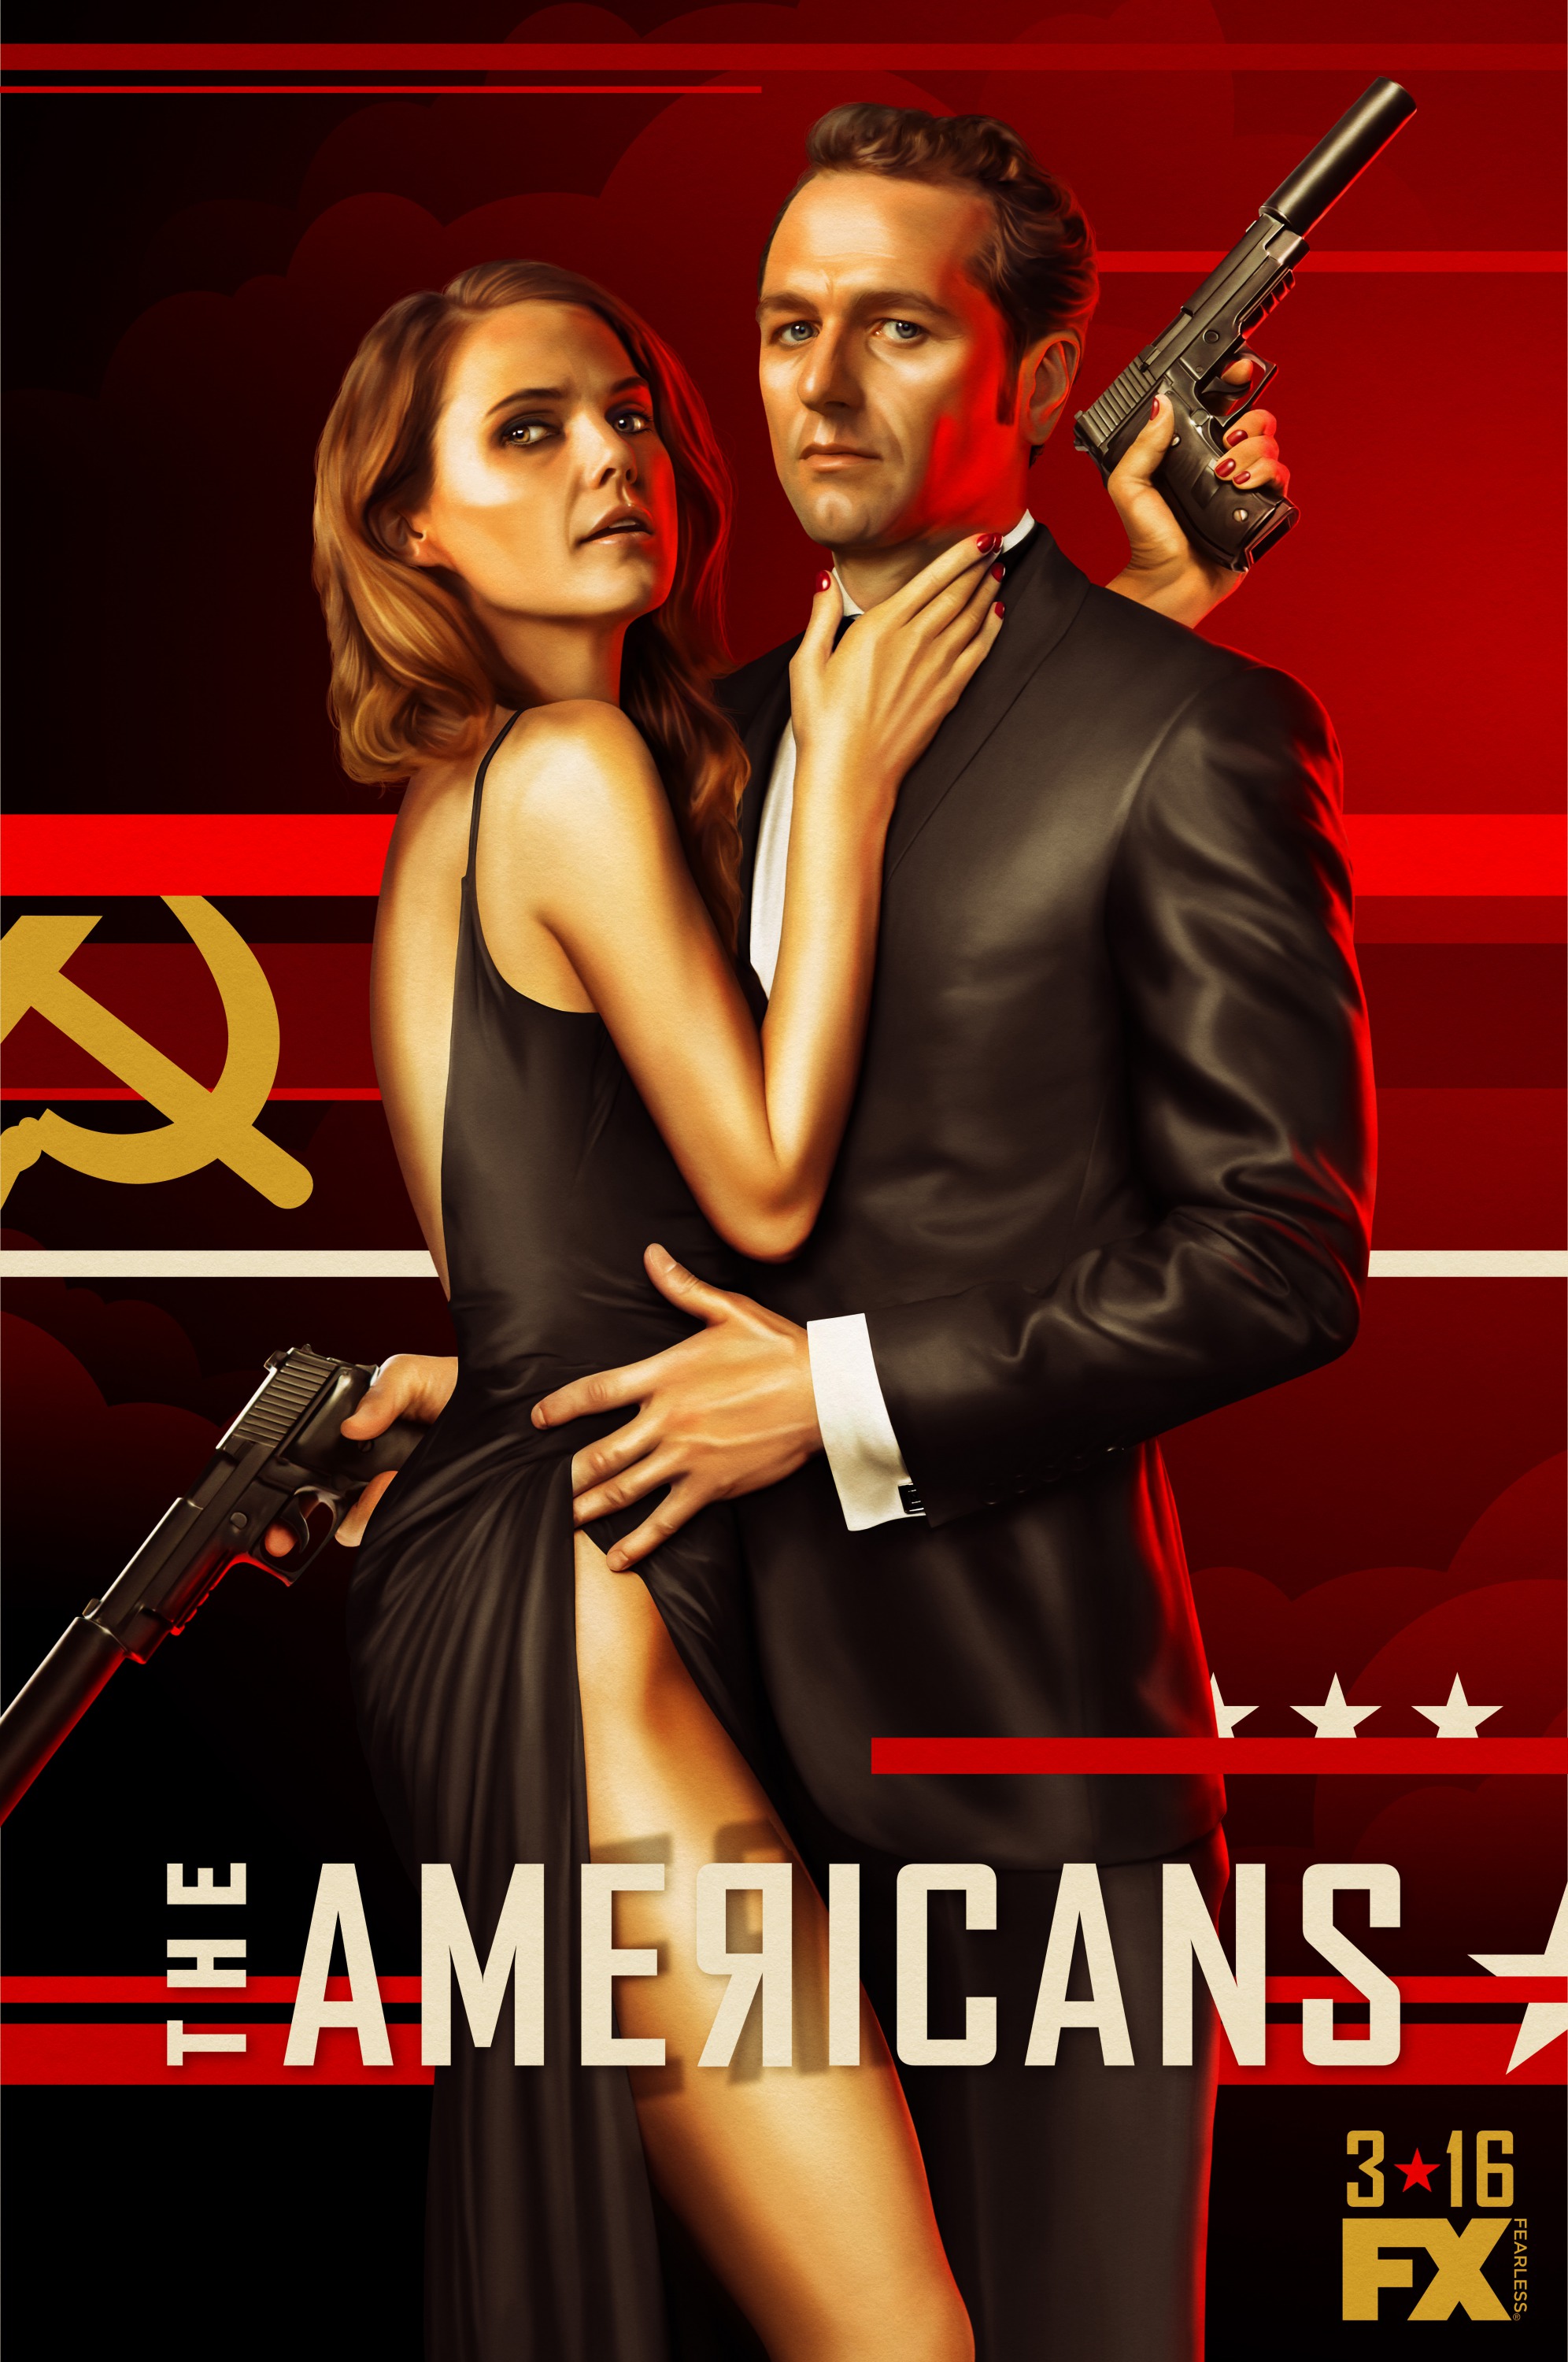 Mega Sized TV Poster Image for The Americans (#13 of 16)